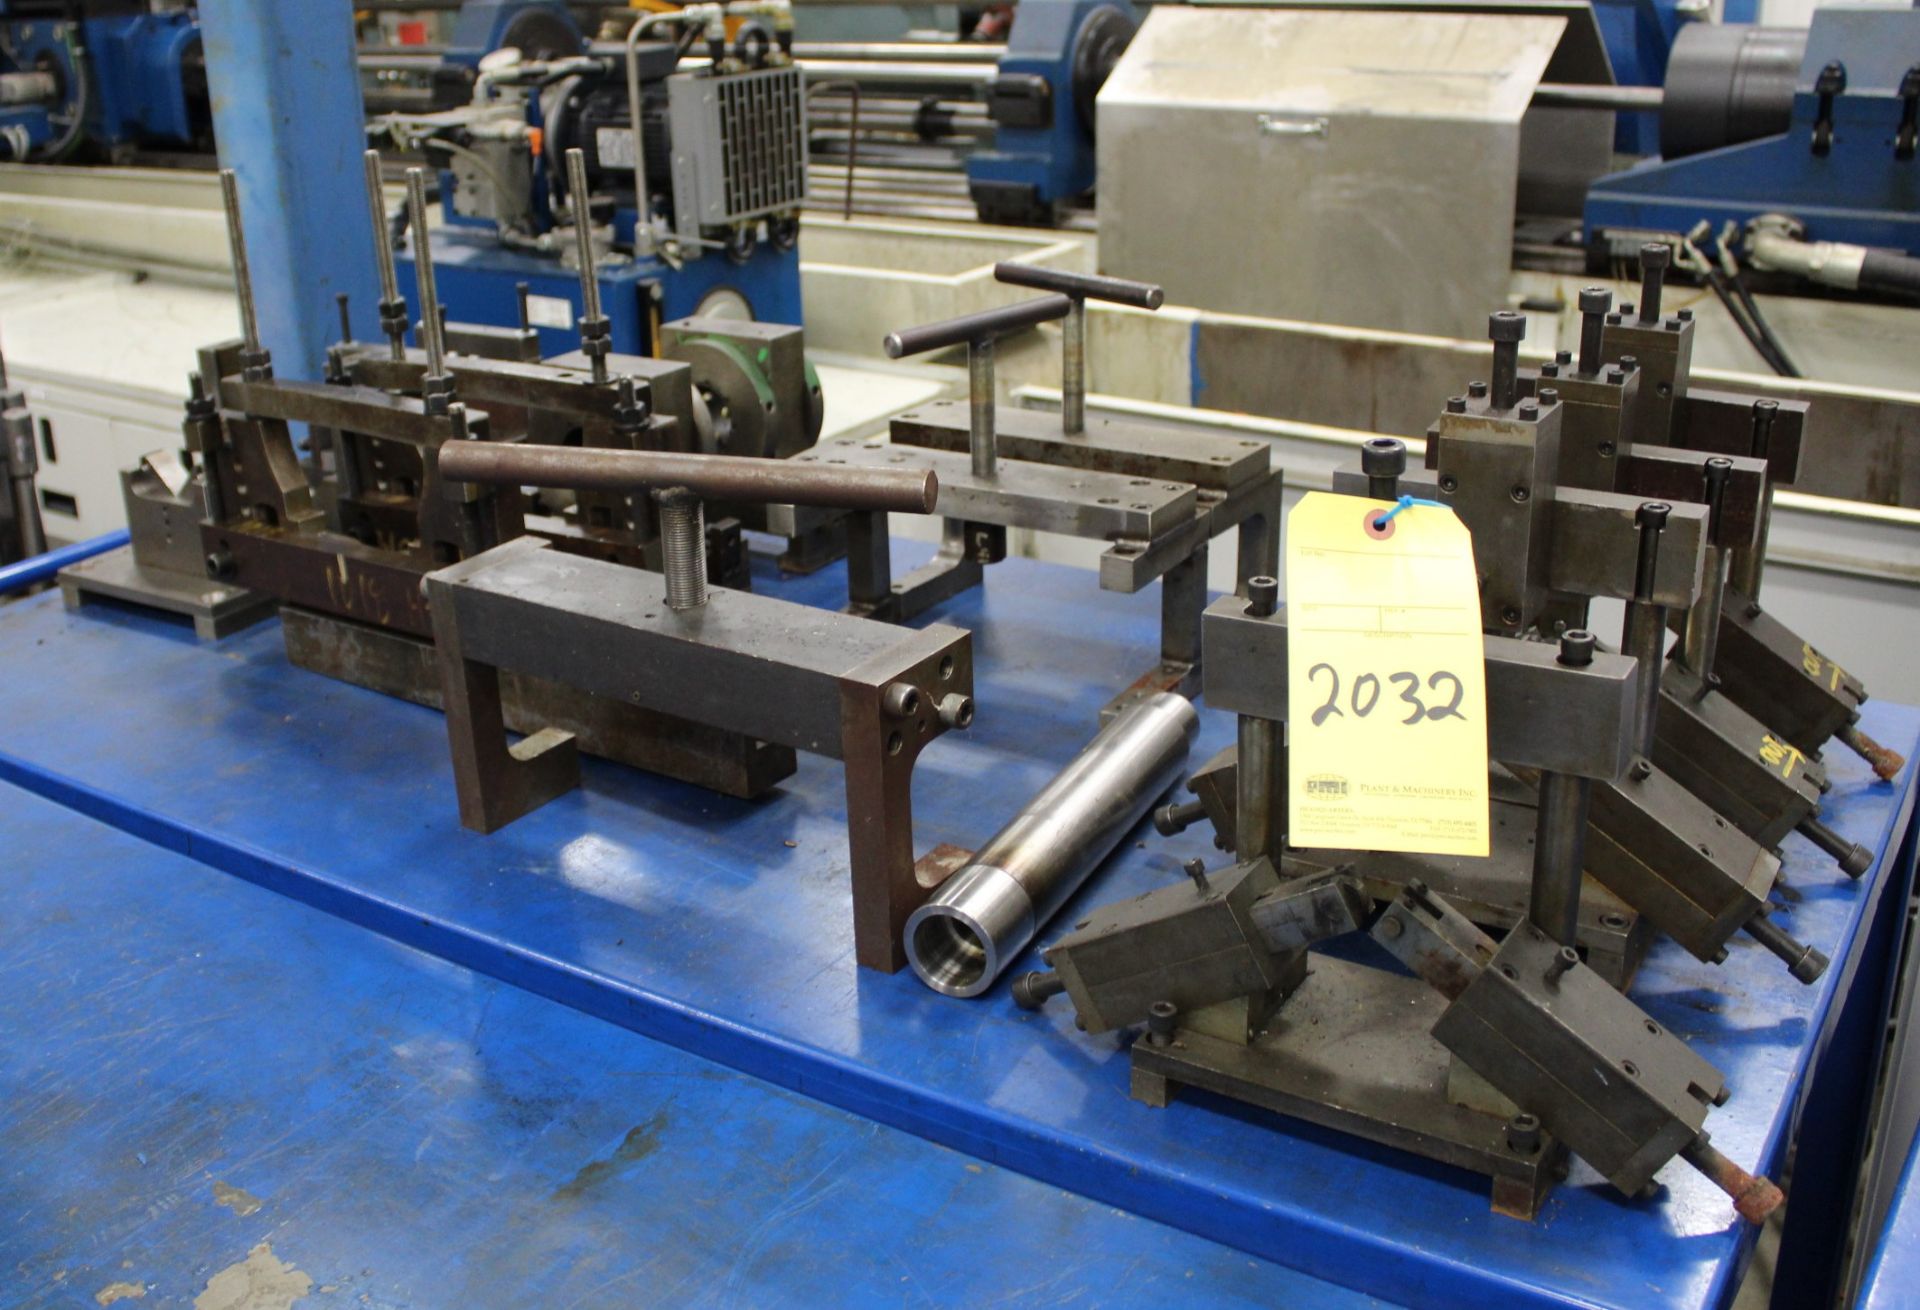 LOT OF GUN DRILL WORKHOLDING FIXTURES (Located at: Langham Creek Machine Works, 37470 FM 529,